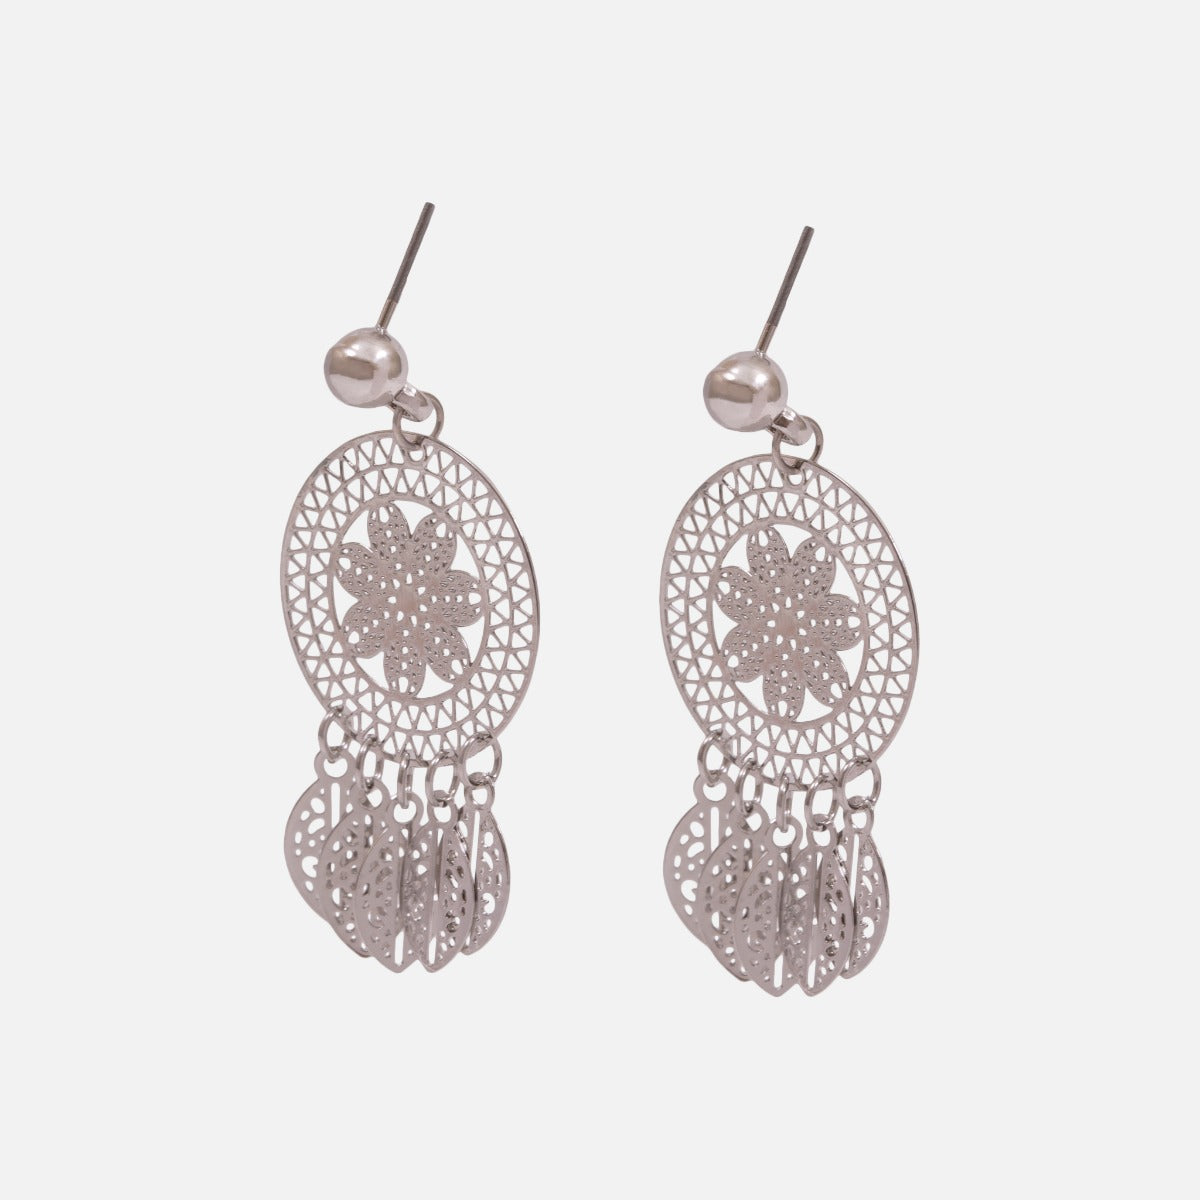 Silvered earrings with dream catcher and leaves charms